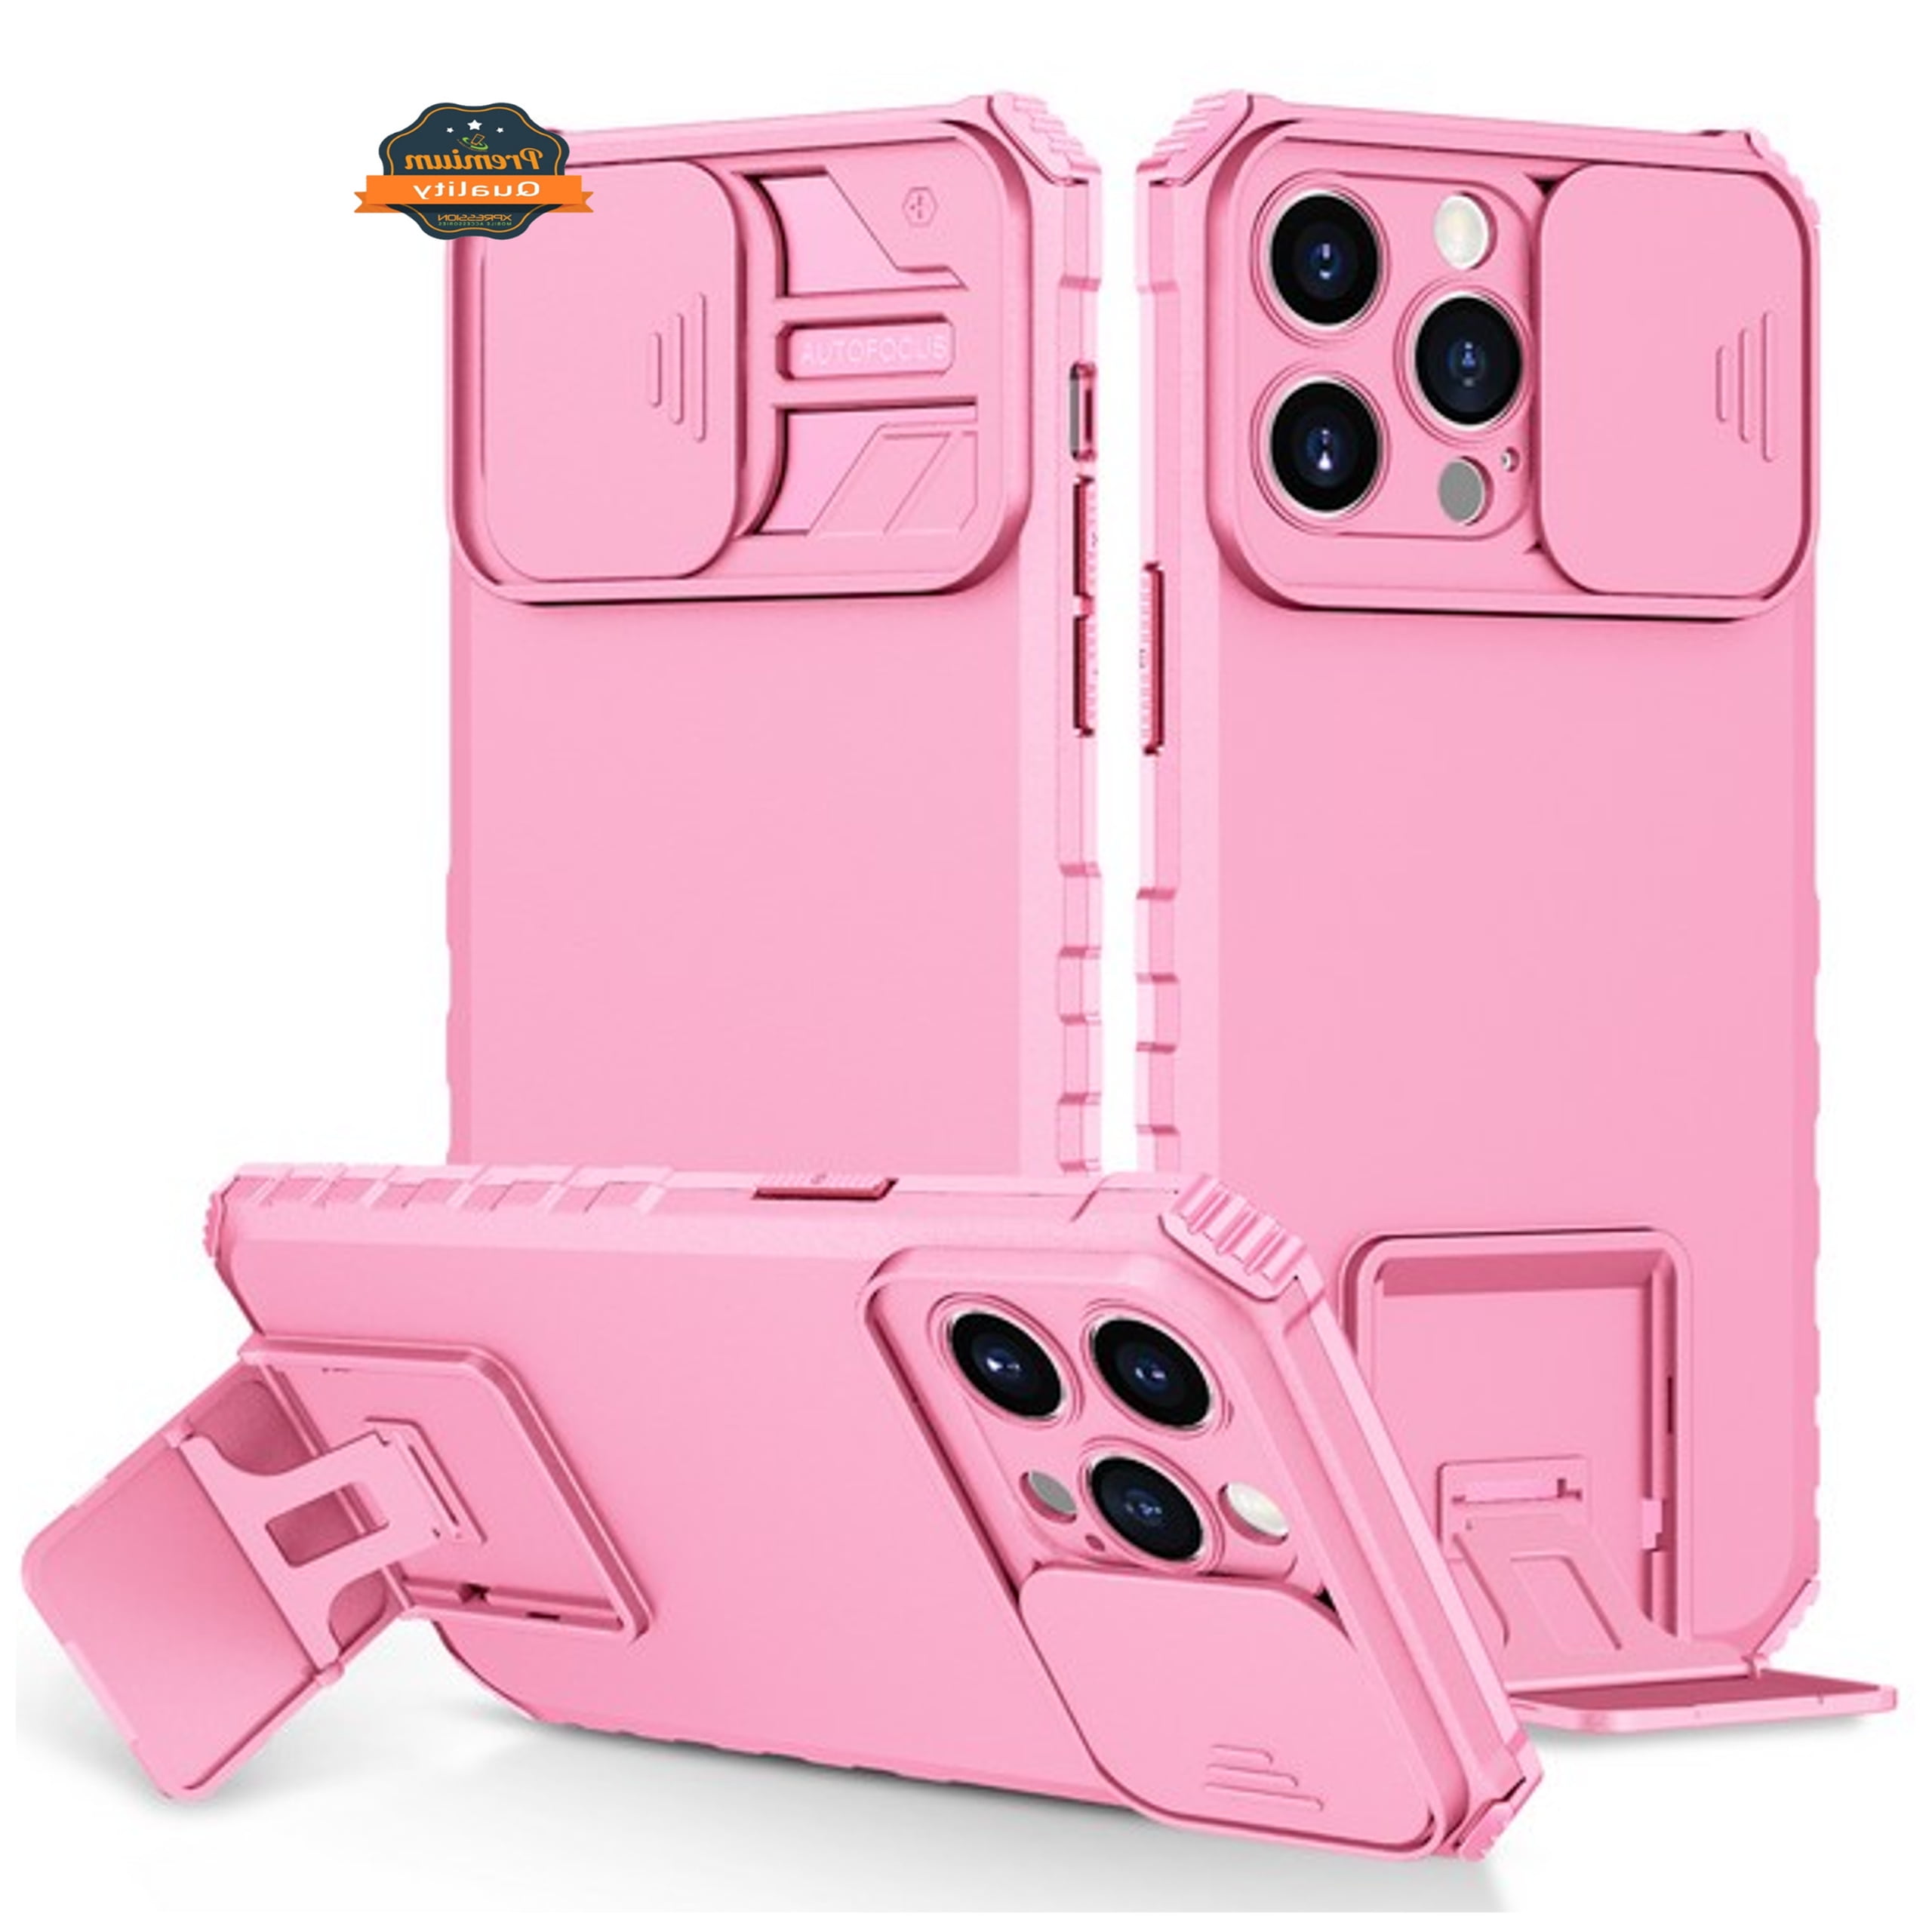 Kiq Square TPU Series Cute iPhone 14 Pro Max Case for Women Girls Compatible Apple iPhone 6.7 inch 2022 - Hot Pink